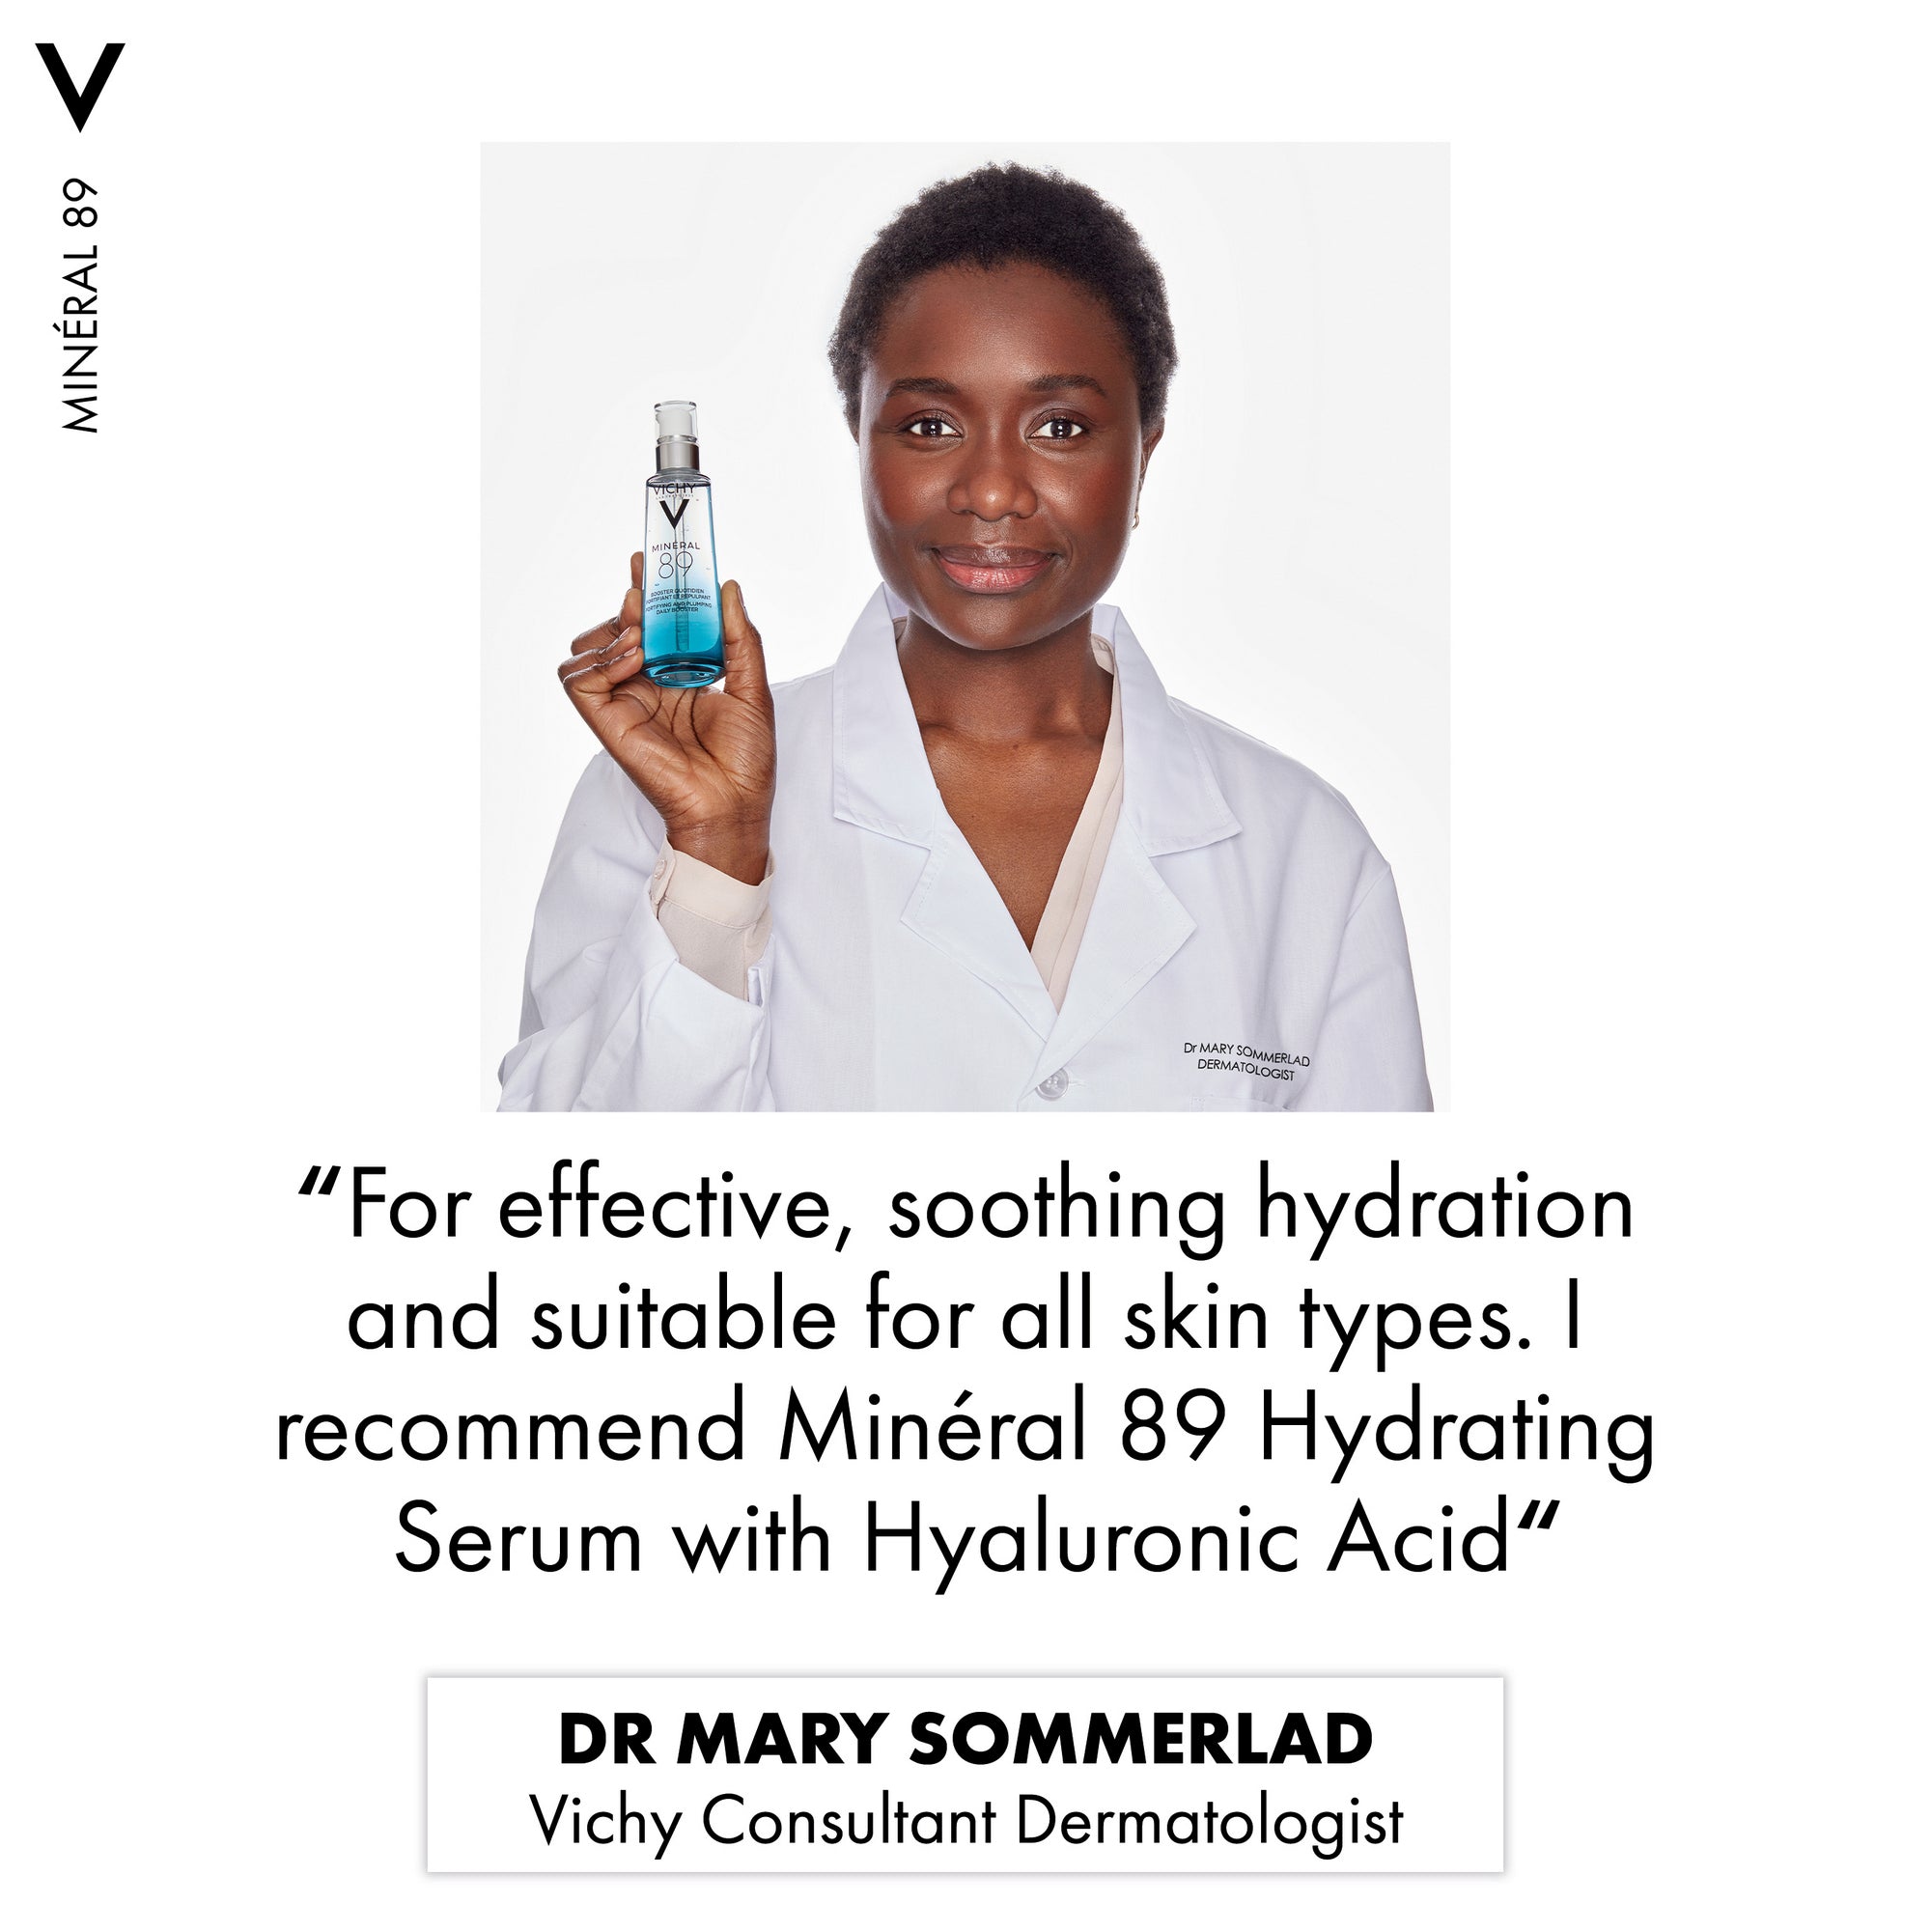 Vichy Mineral 89 Hyaluronic Acid Booster